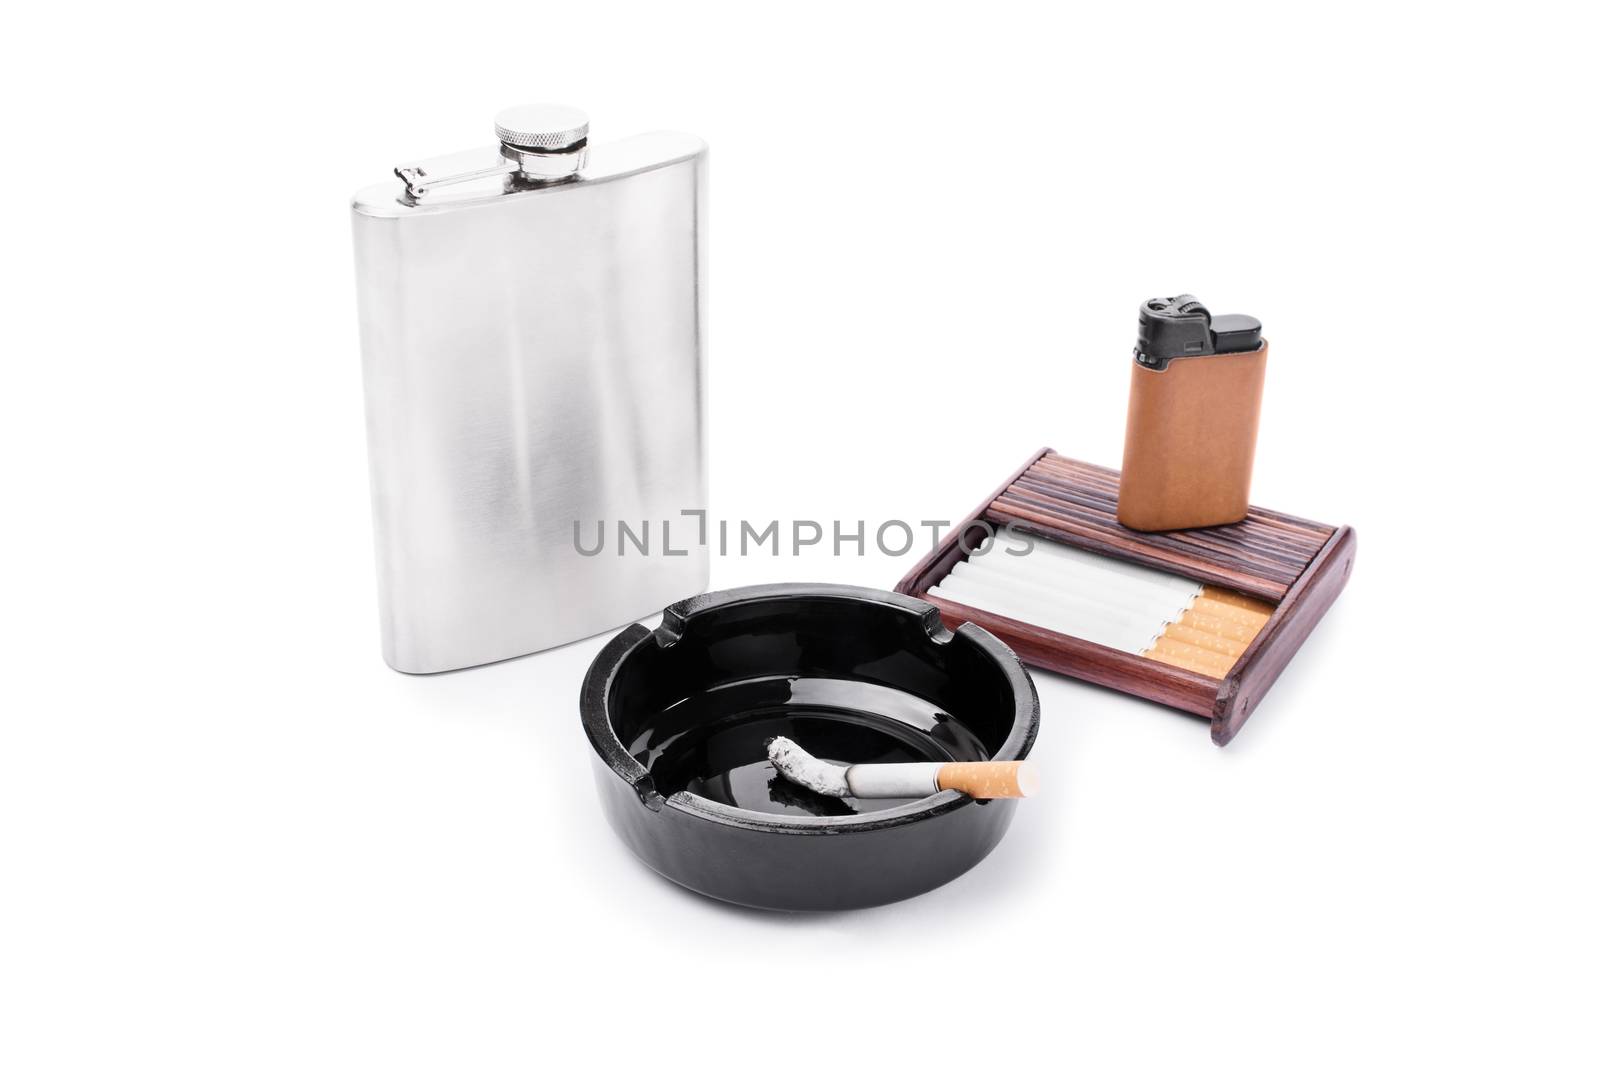 Stainless steel flask, ashtray, some cigarettes, and lighter on a cigarette case, isolated on white background.